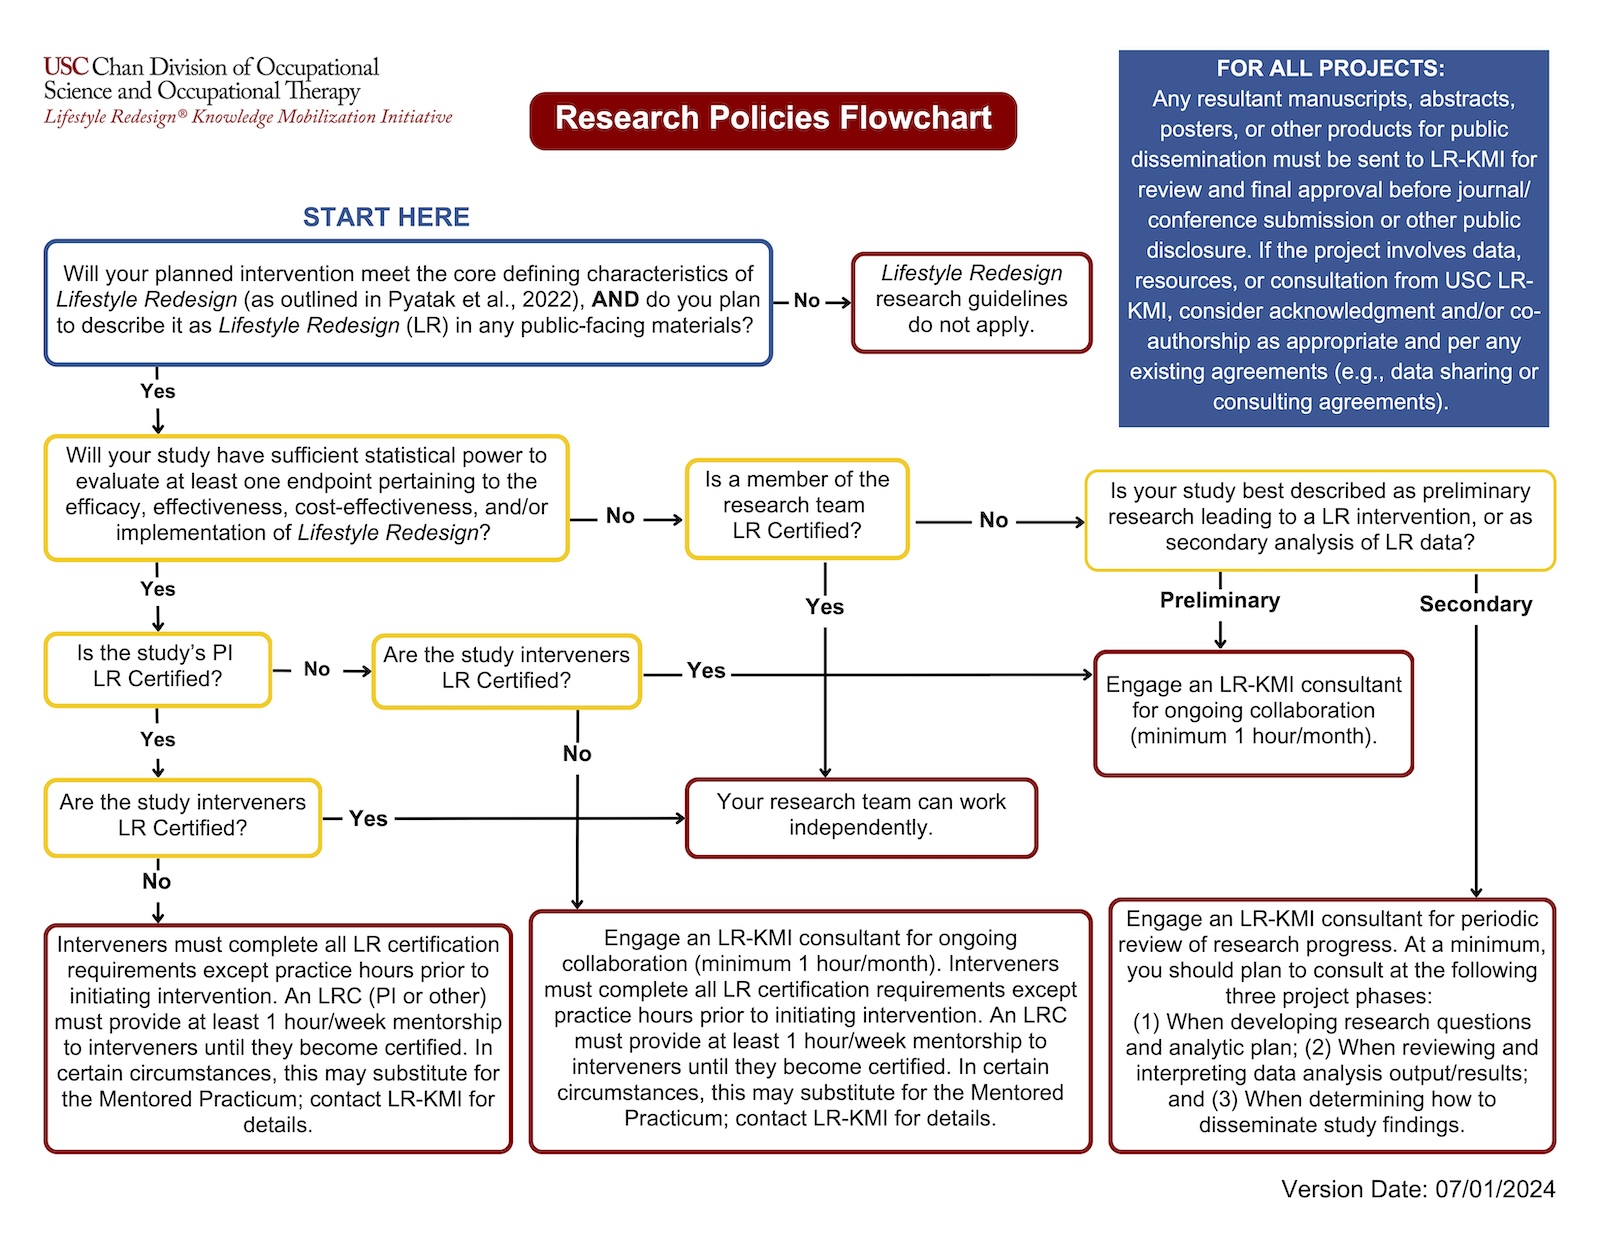 Lifestyle Redesign research policies flowchart